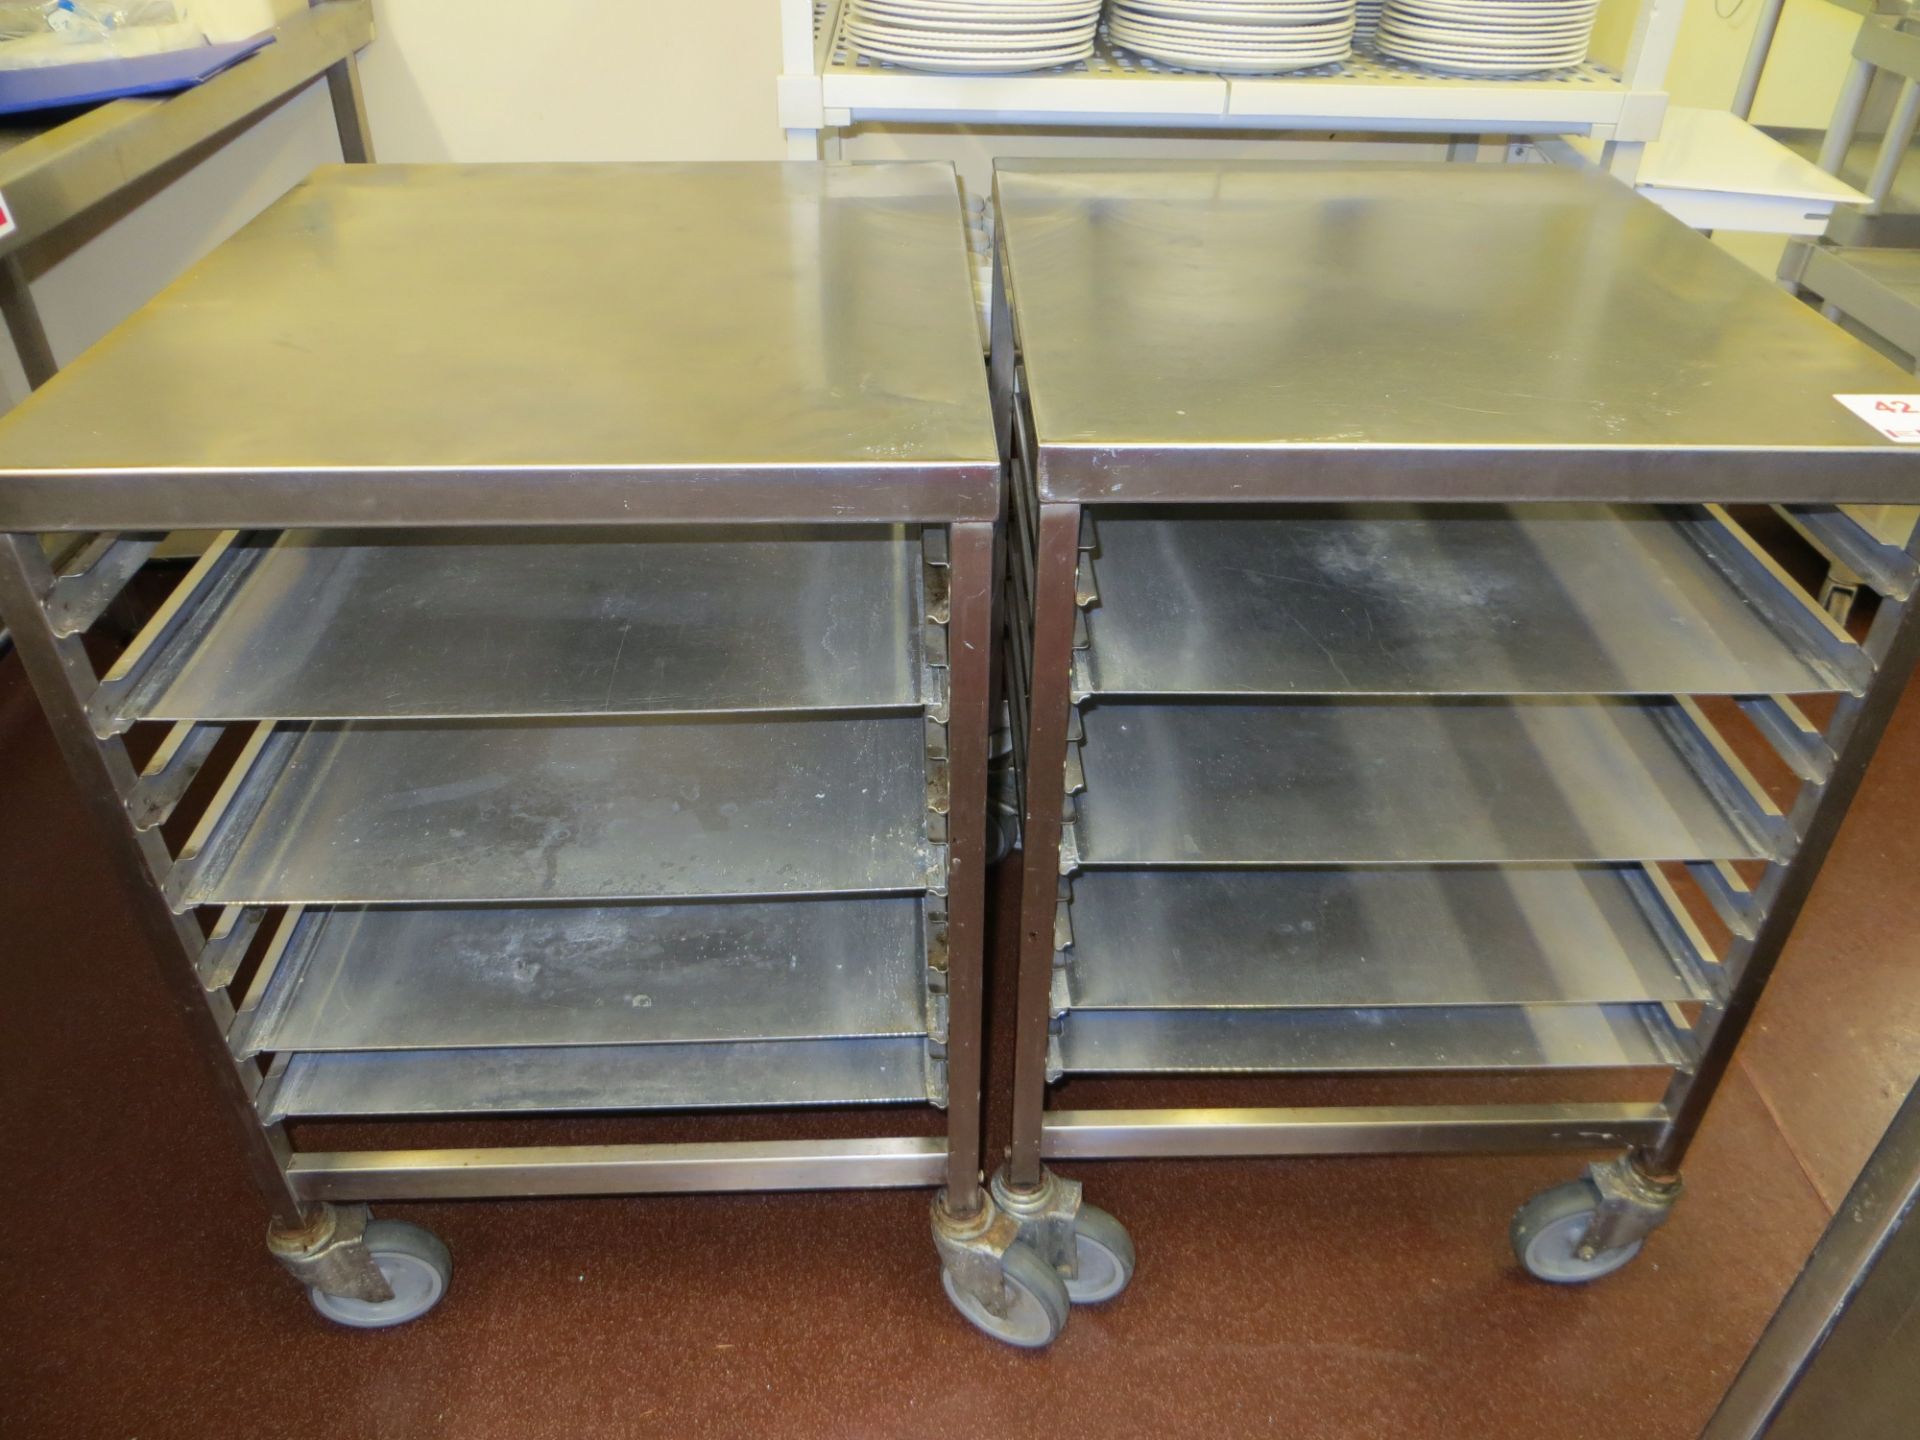 Two stainless steel tray units